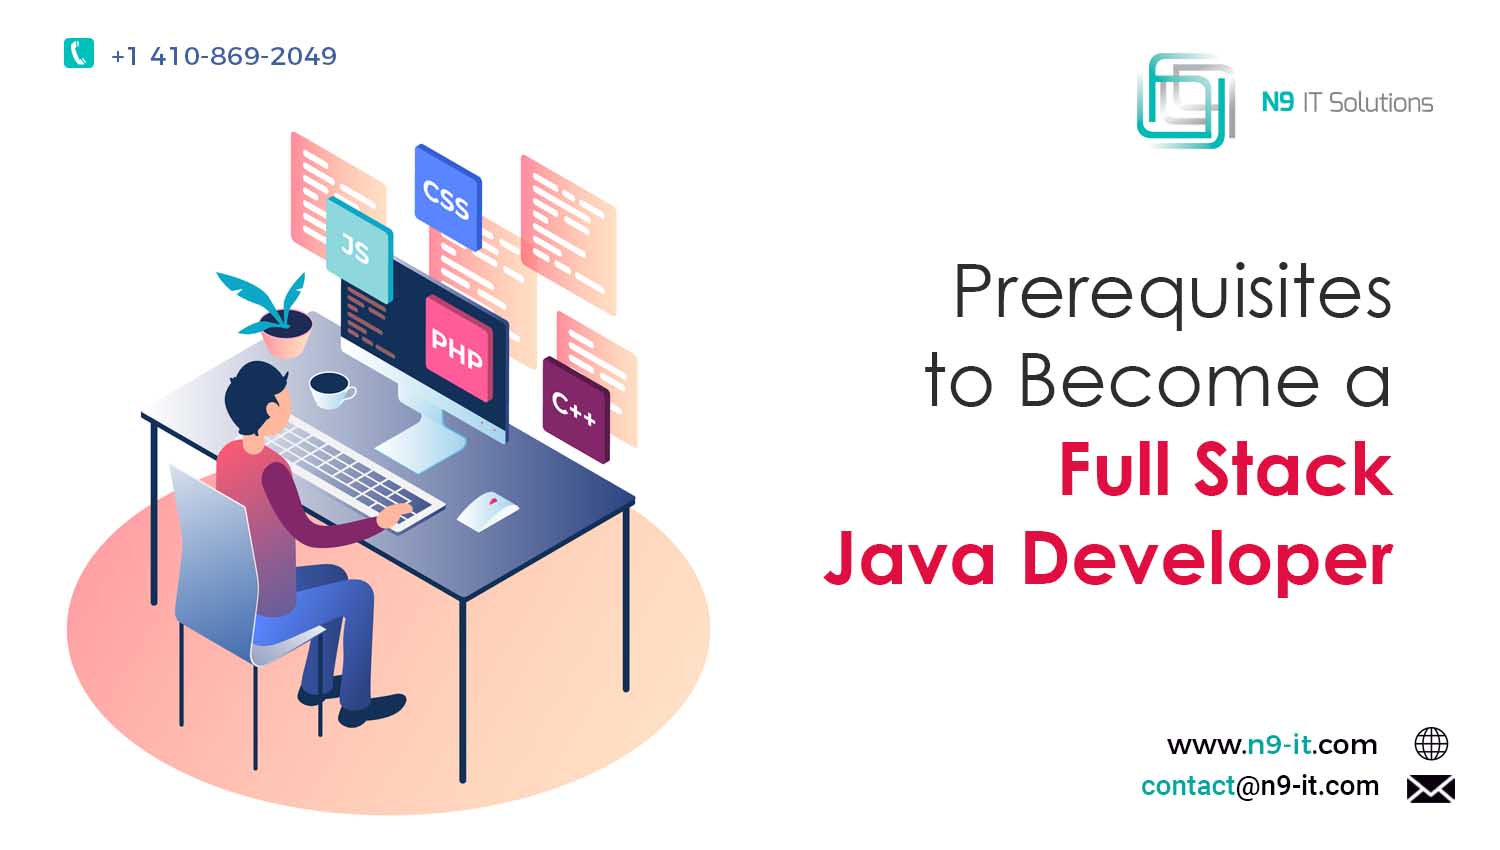 Prerequisites to Become a Full Stack Java Developer